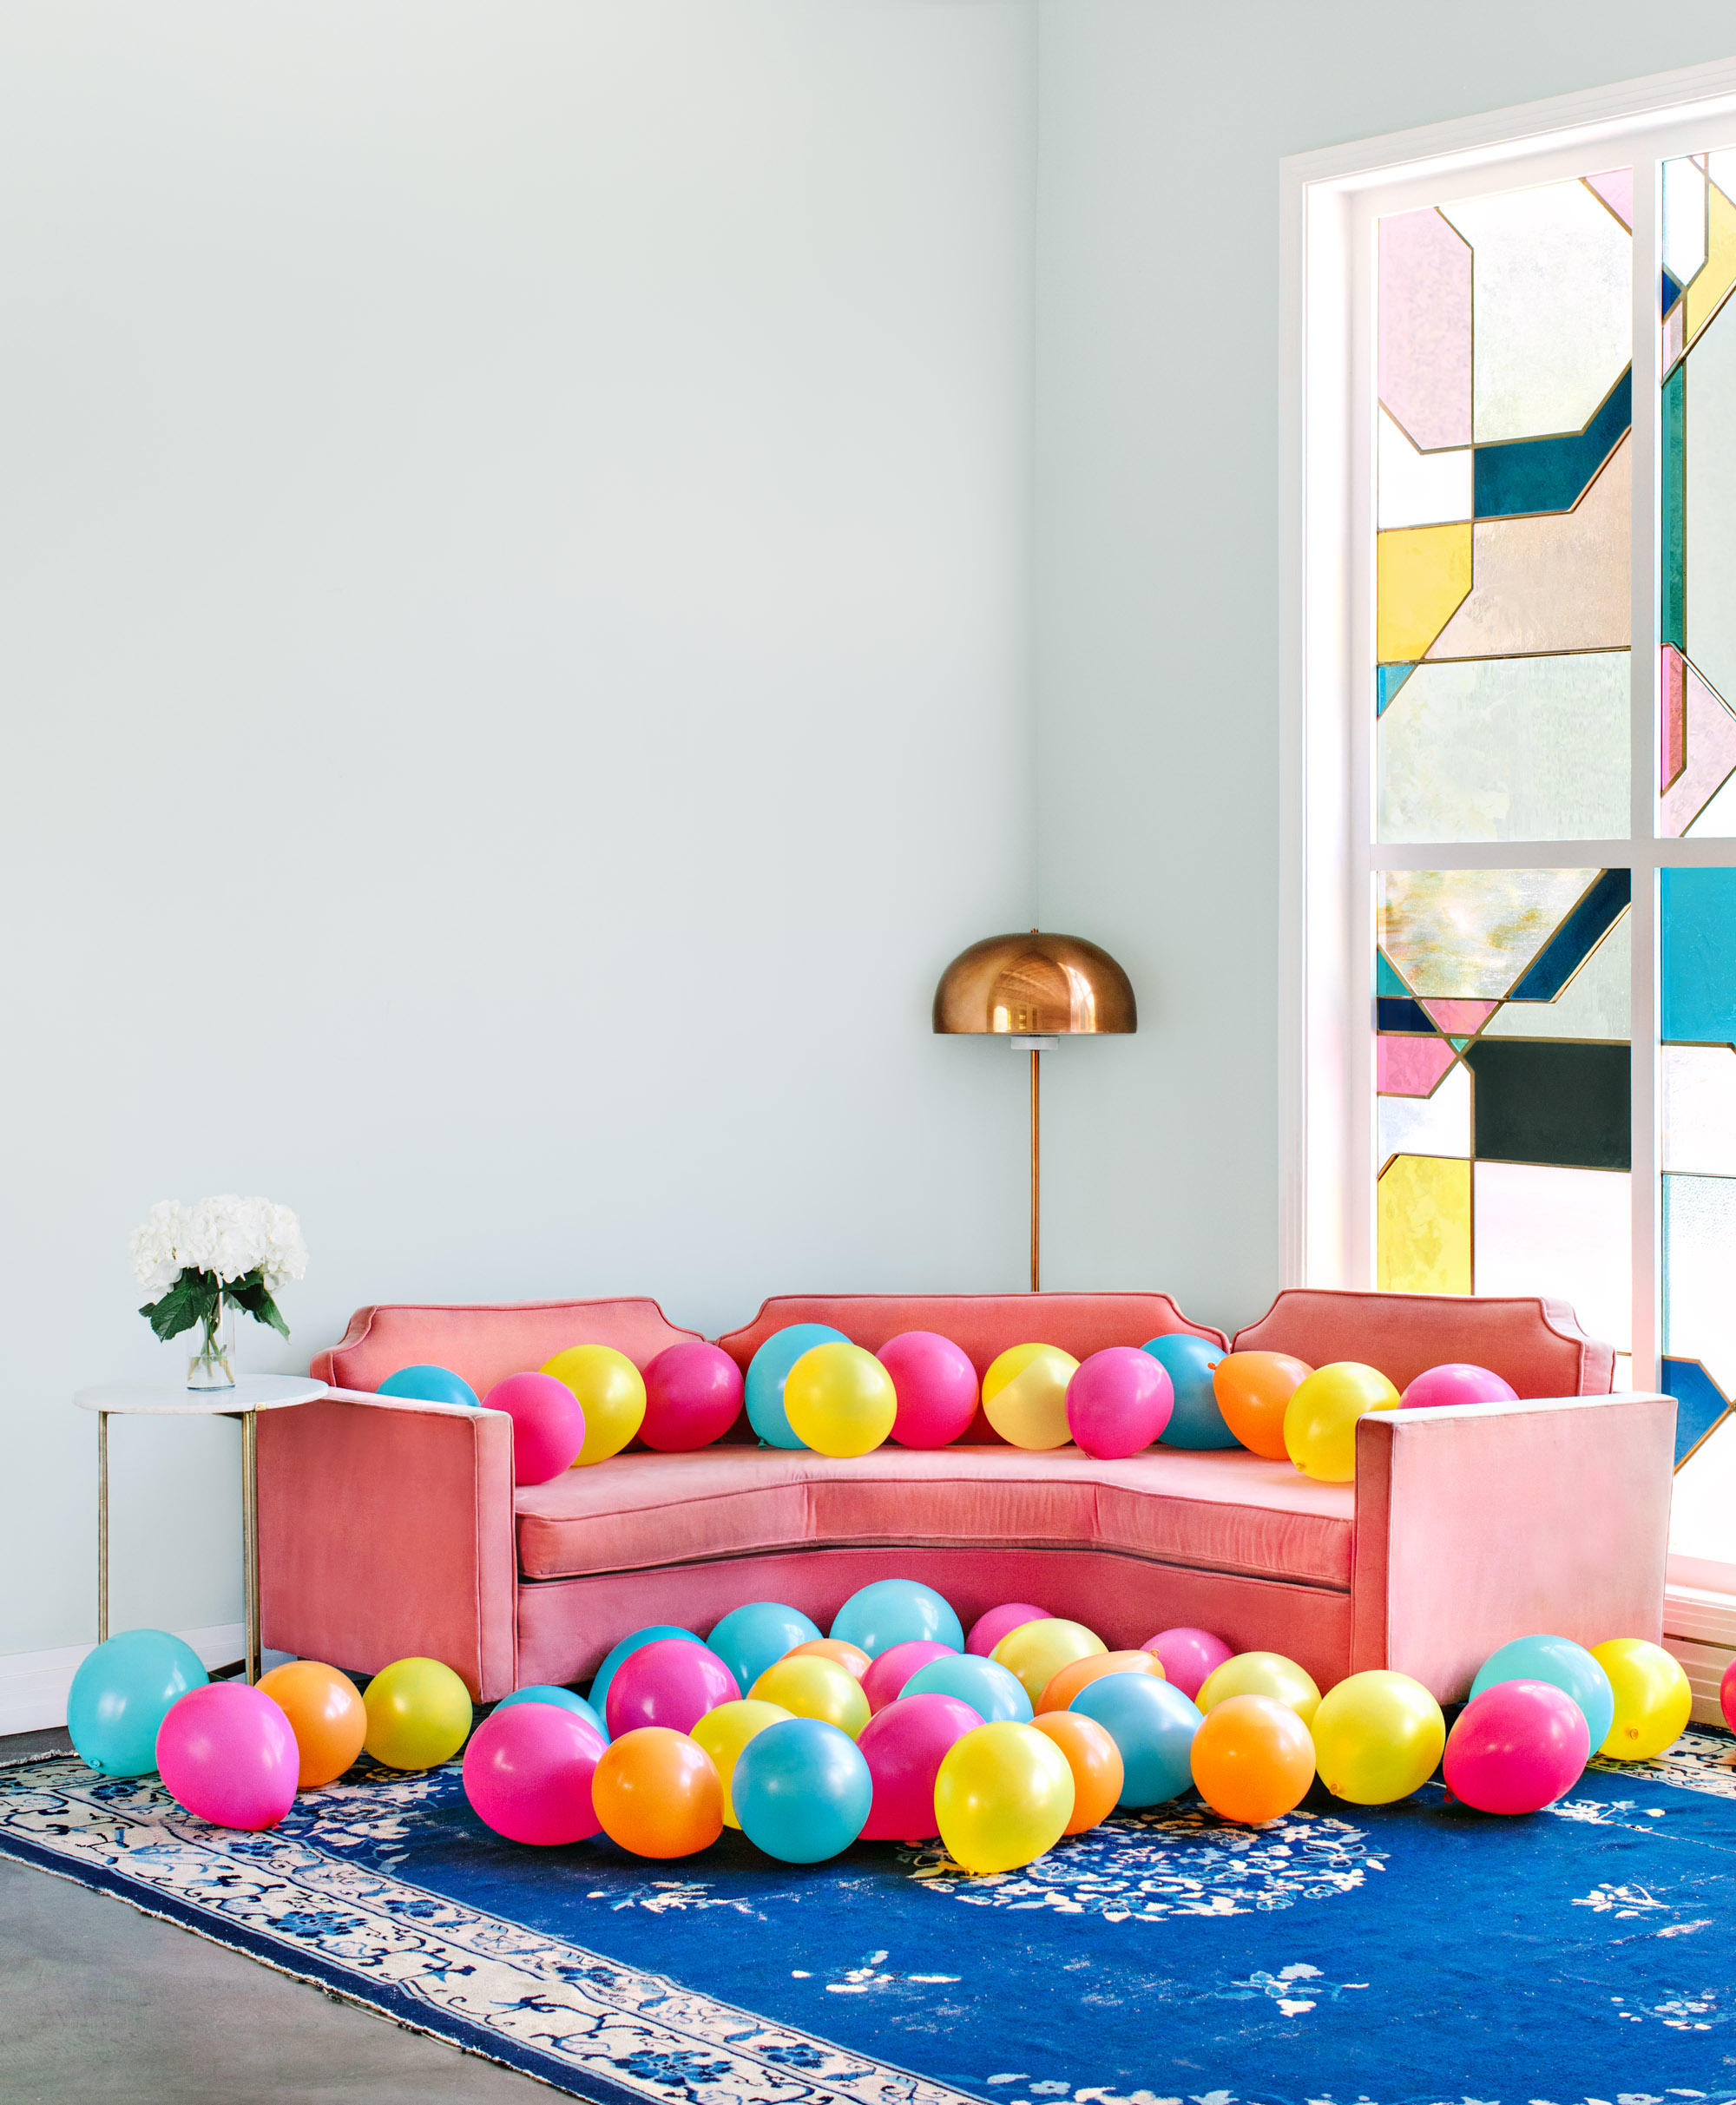 The Fig House's pink couch with colorful balloons - marycostaphotography.com